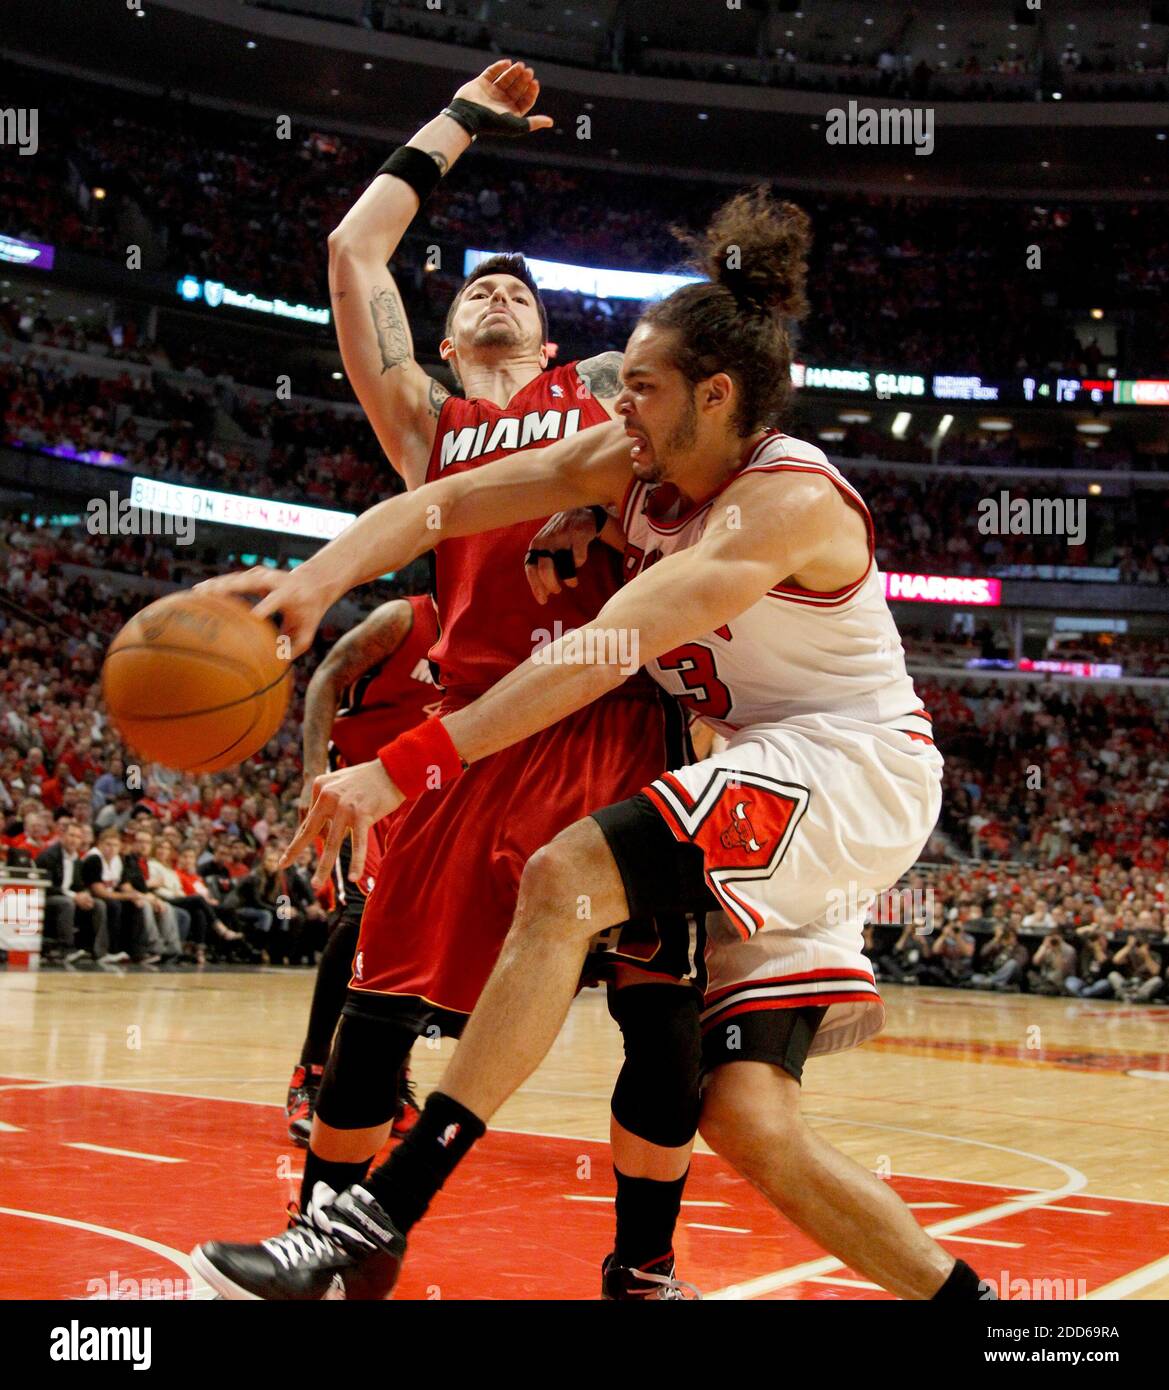 NO FILM, NO VIDEO, NO TV, NO DOCUMENTARY - Chicago Bulls center Joakim Noah (13) passes the ball past Miami Heat shooting guard Mike Miller (13) during the first half in Game 2 of the NBA Basketball Eastern Conference finals at the United Center in Chicago, IL, USA on May 18, 2011. Miami won 85-75. Photo by Nuccio DiNuzzo/Chicago Tribune/MCT/ABACAPRESS.COM Stock Photo